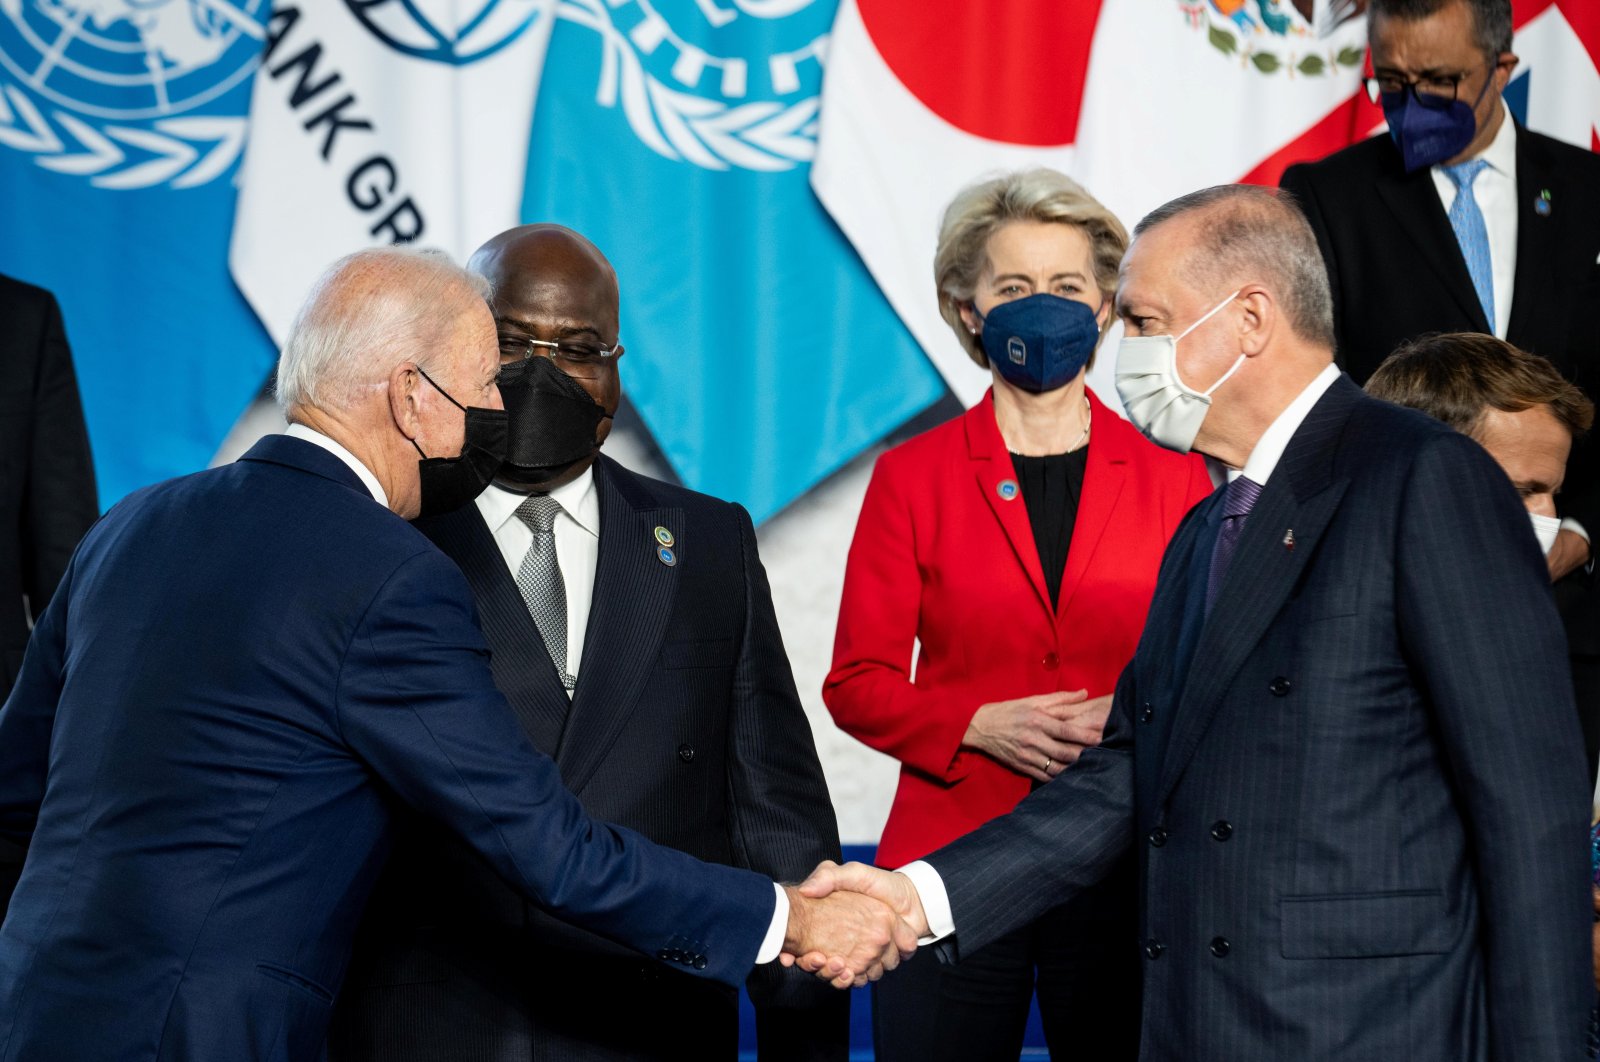 U.S. President Joe Biden (L) and President Recep Tayyip Erdoğan shake hands during the family photo at the G-20 summit in Rome, Italy, Oct. 30, 2021. (Reuters Photo)